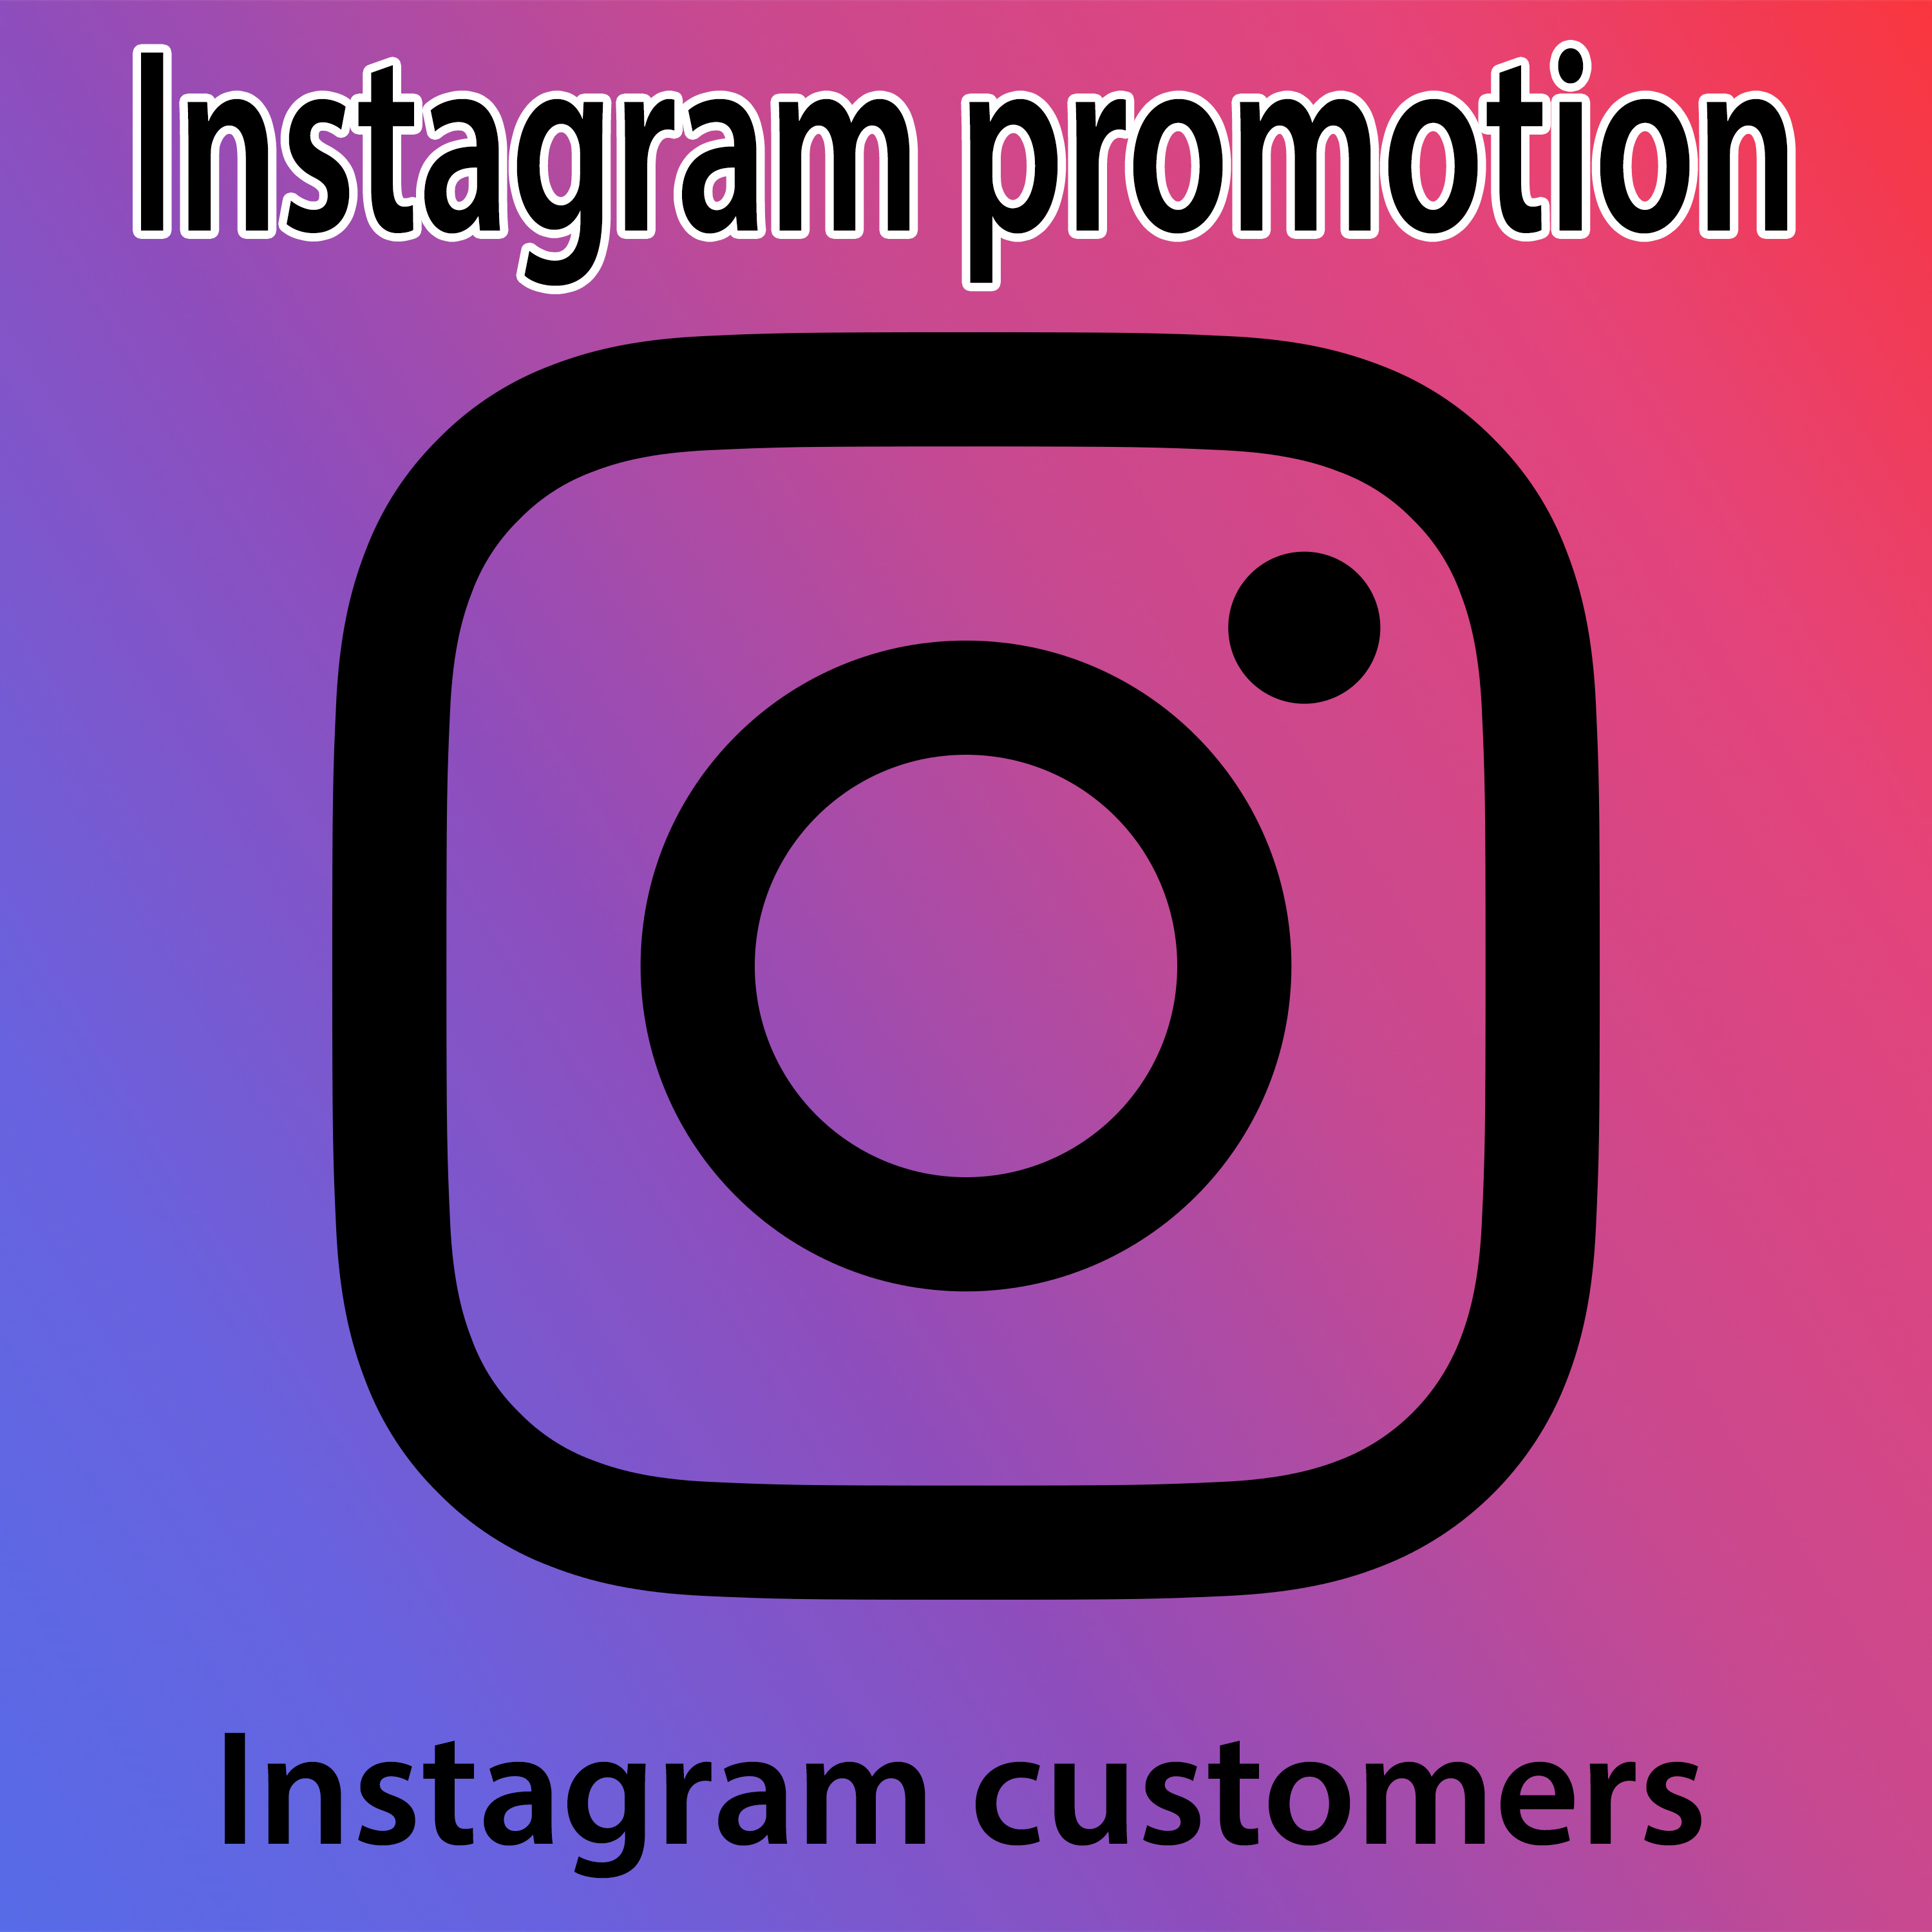 Instagram promotion cover